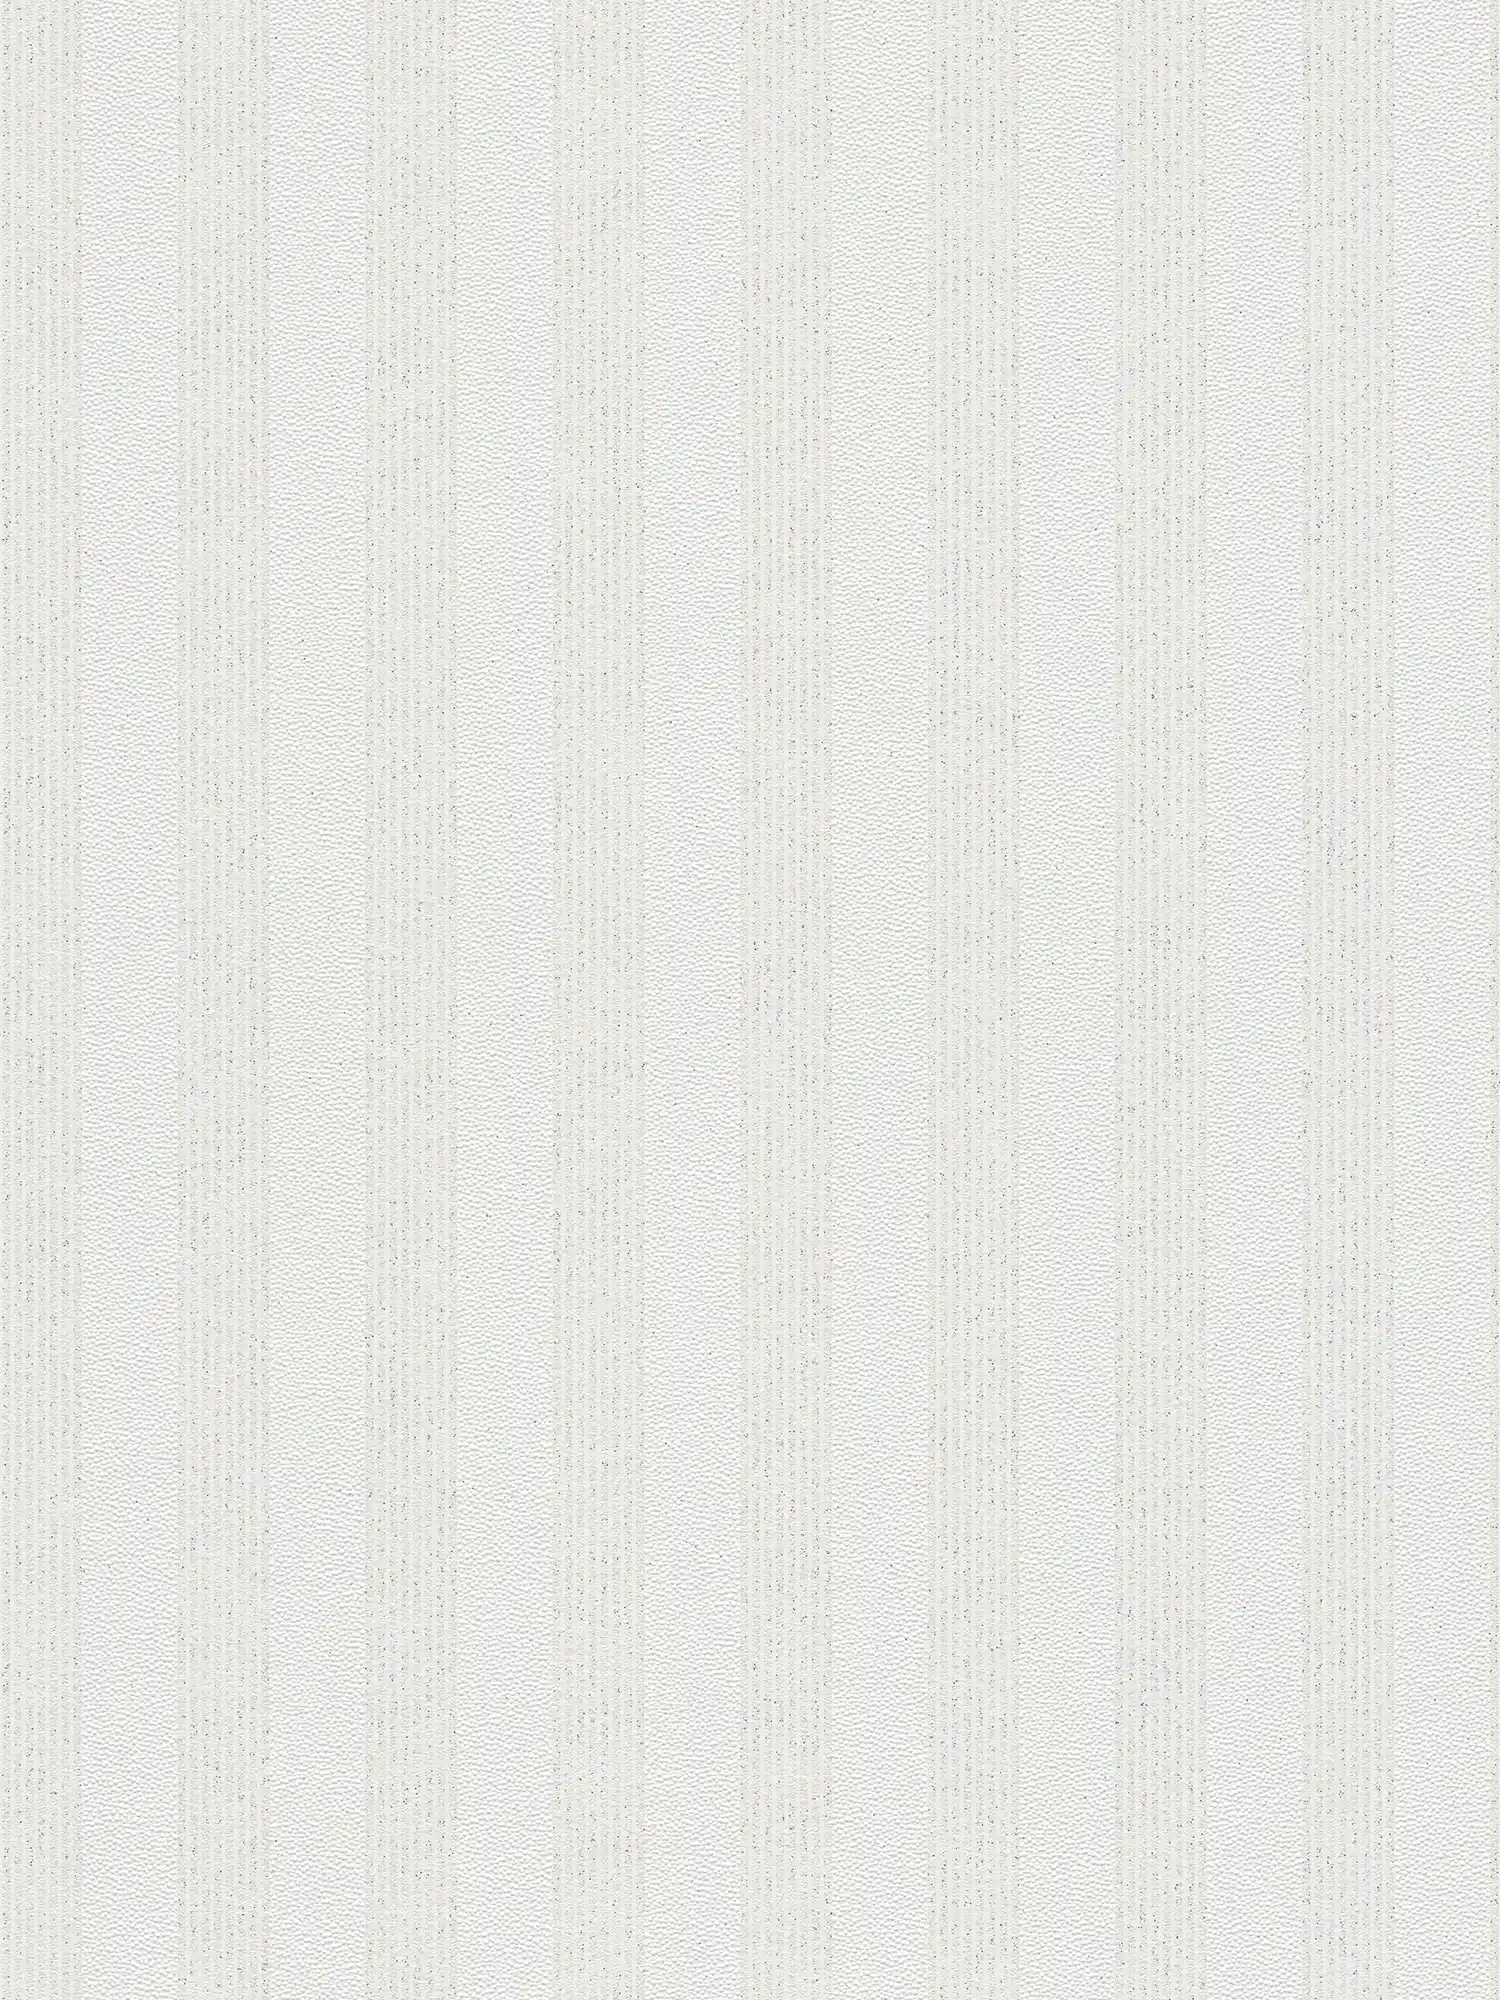 Textured wallpaper with striped pattern and glitter effect - white
